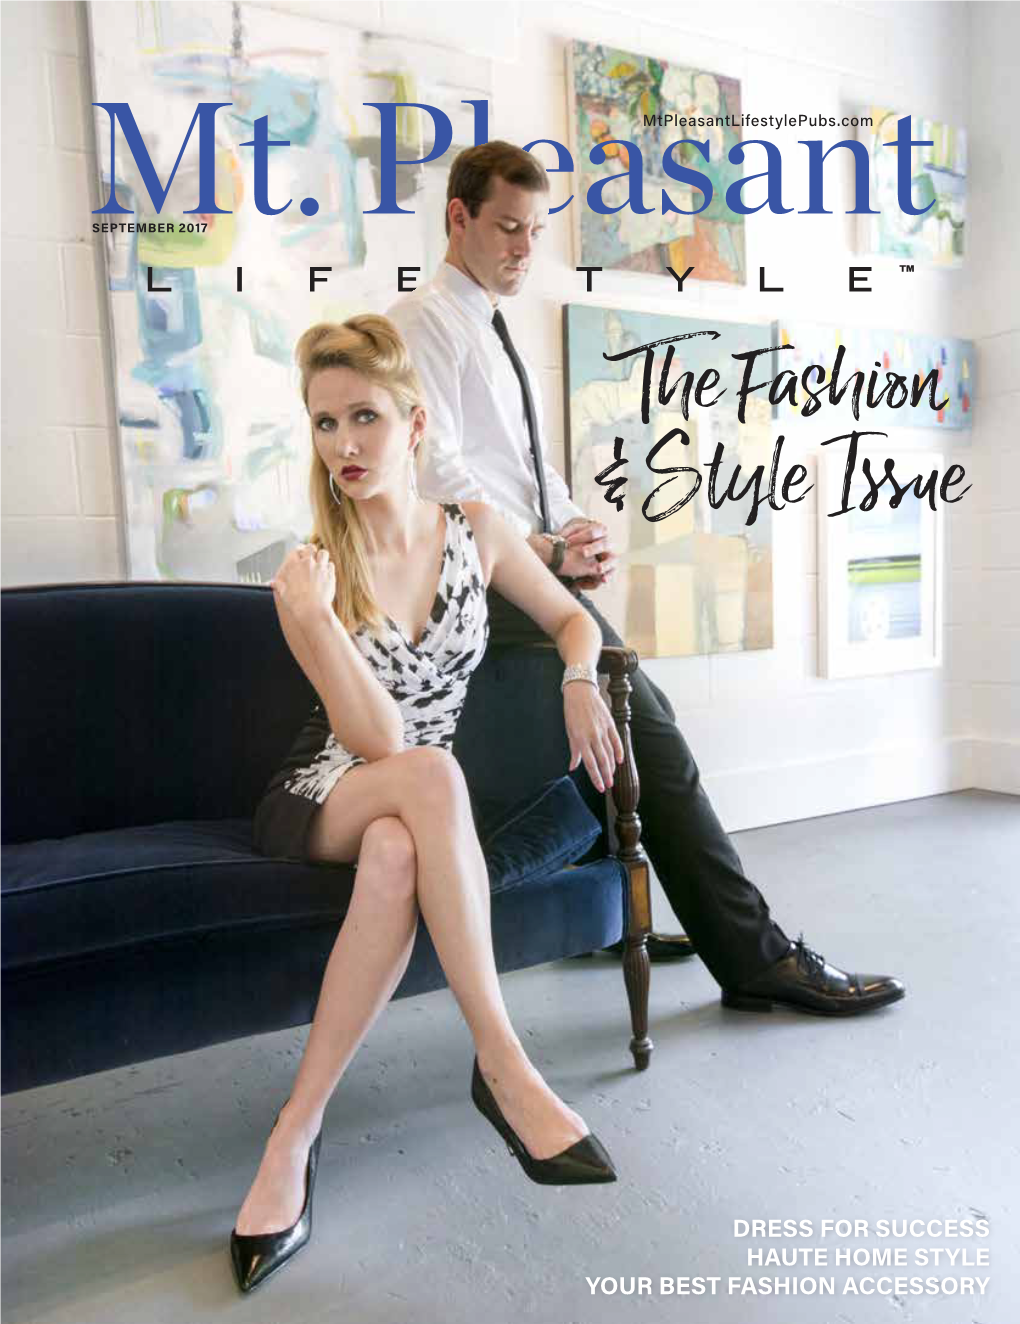 The Fashion & Style Issue